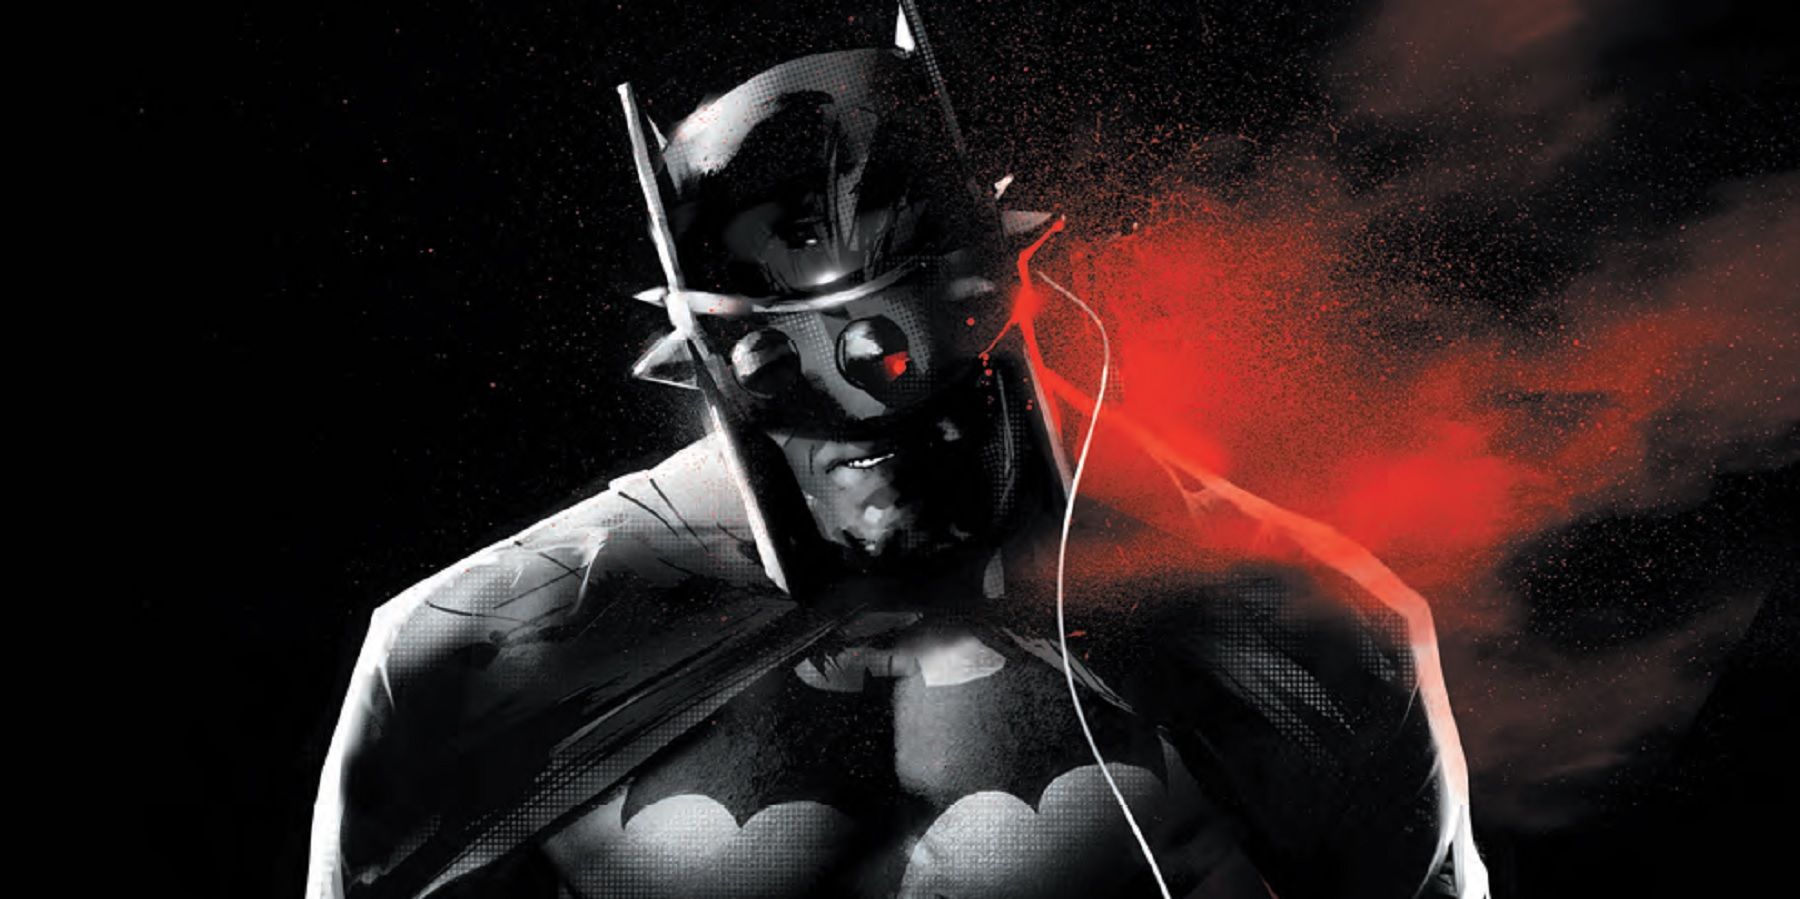 Batman Who Laughs' Spiked Visor is More Sinister Than We Thought